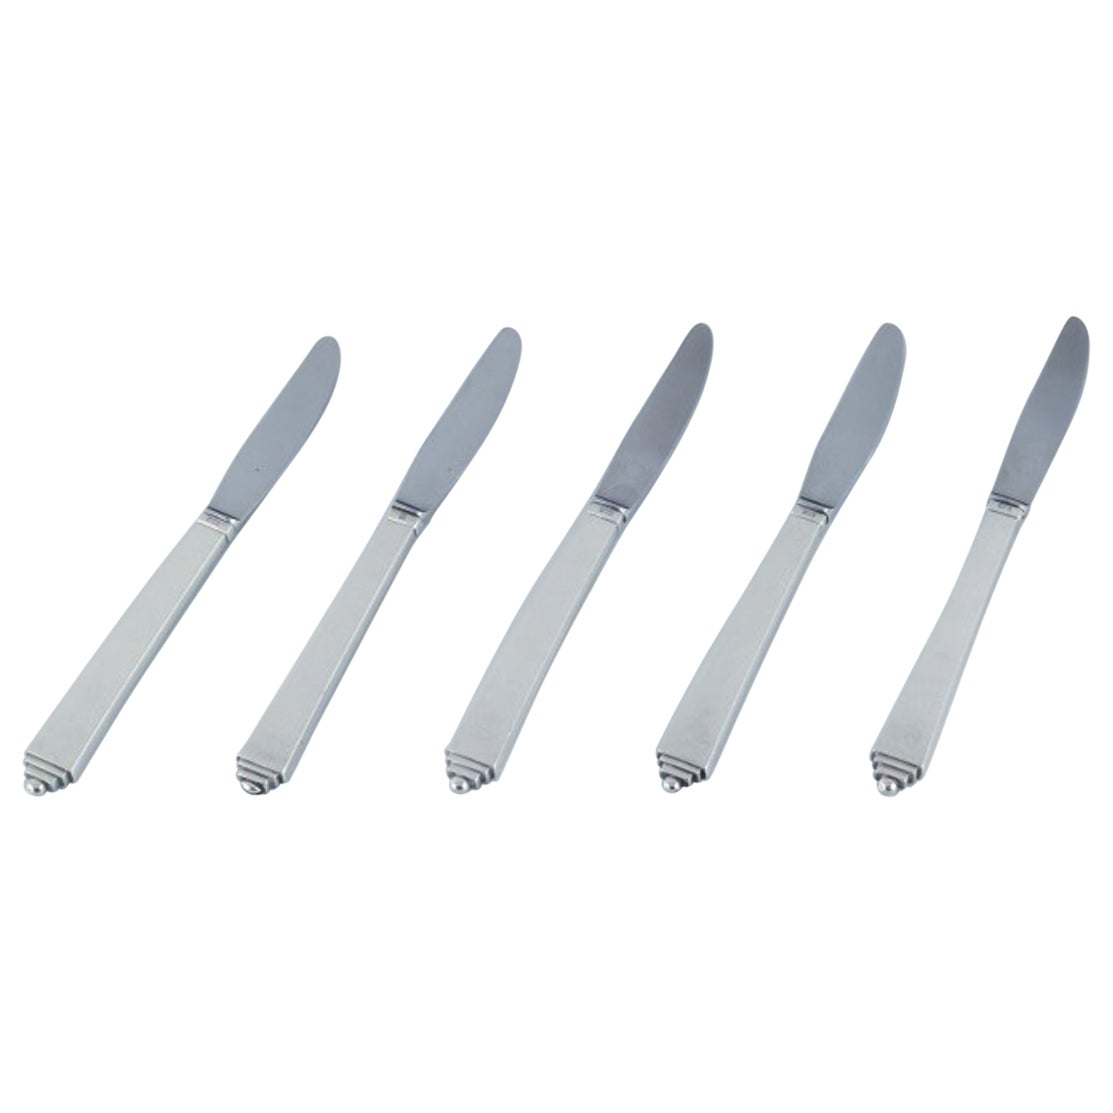 Georg Jensen Pyramid, set of five long-handled lunch knives.